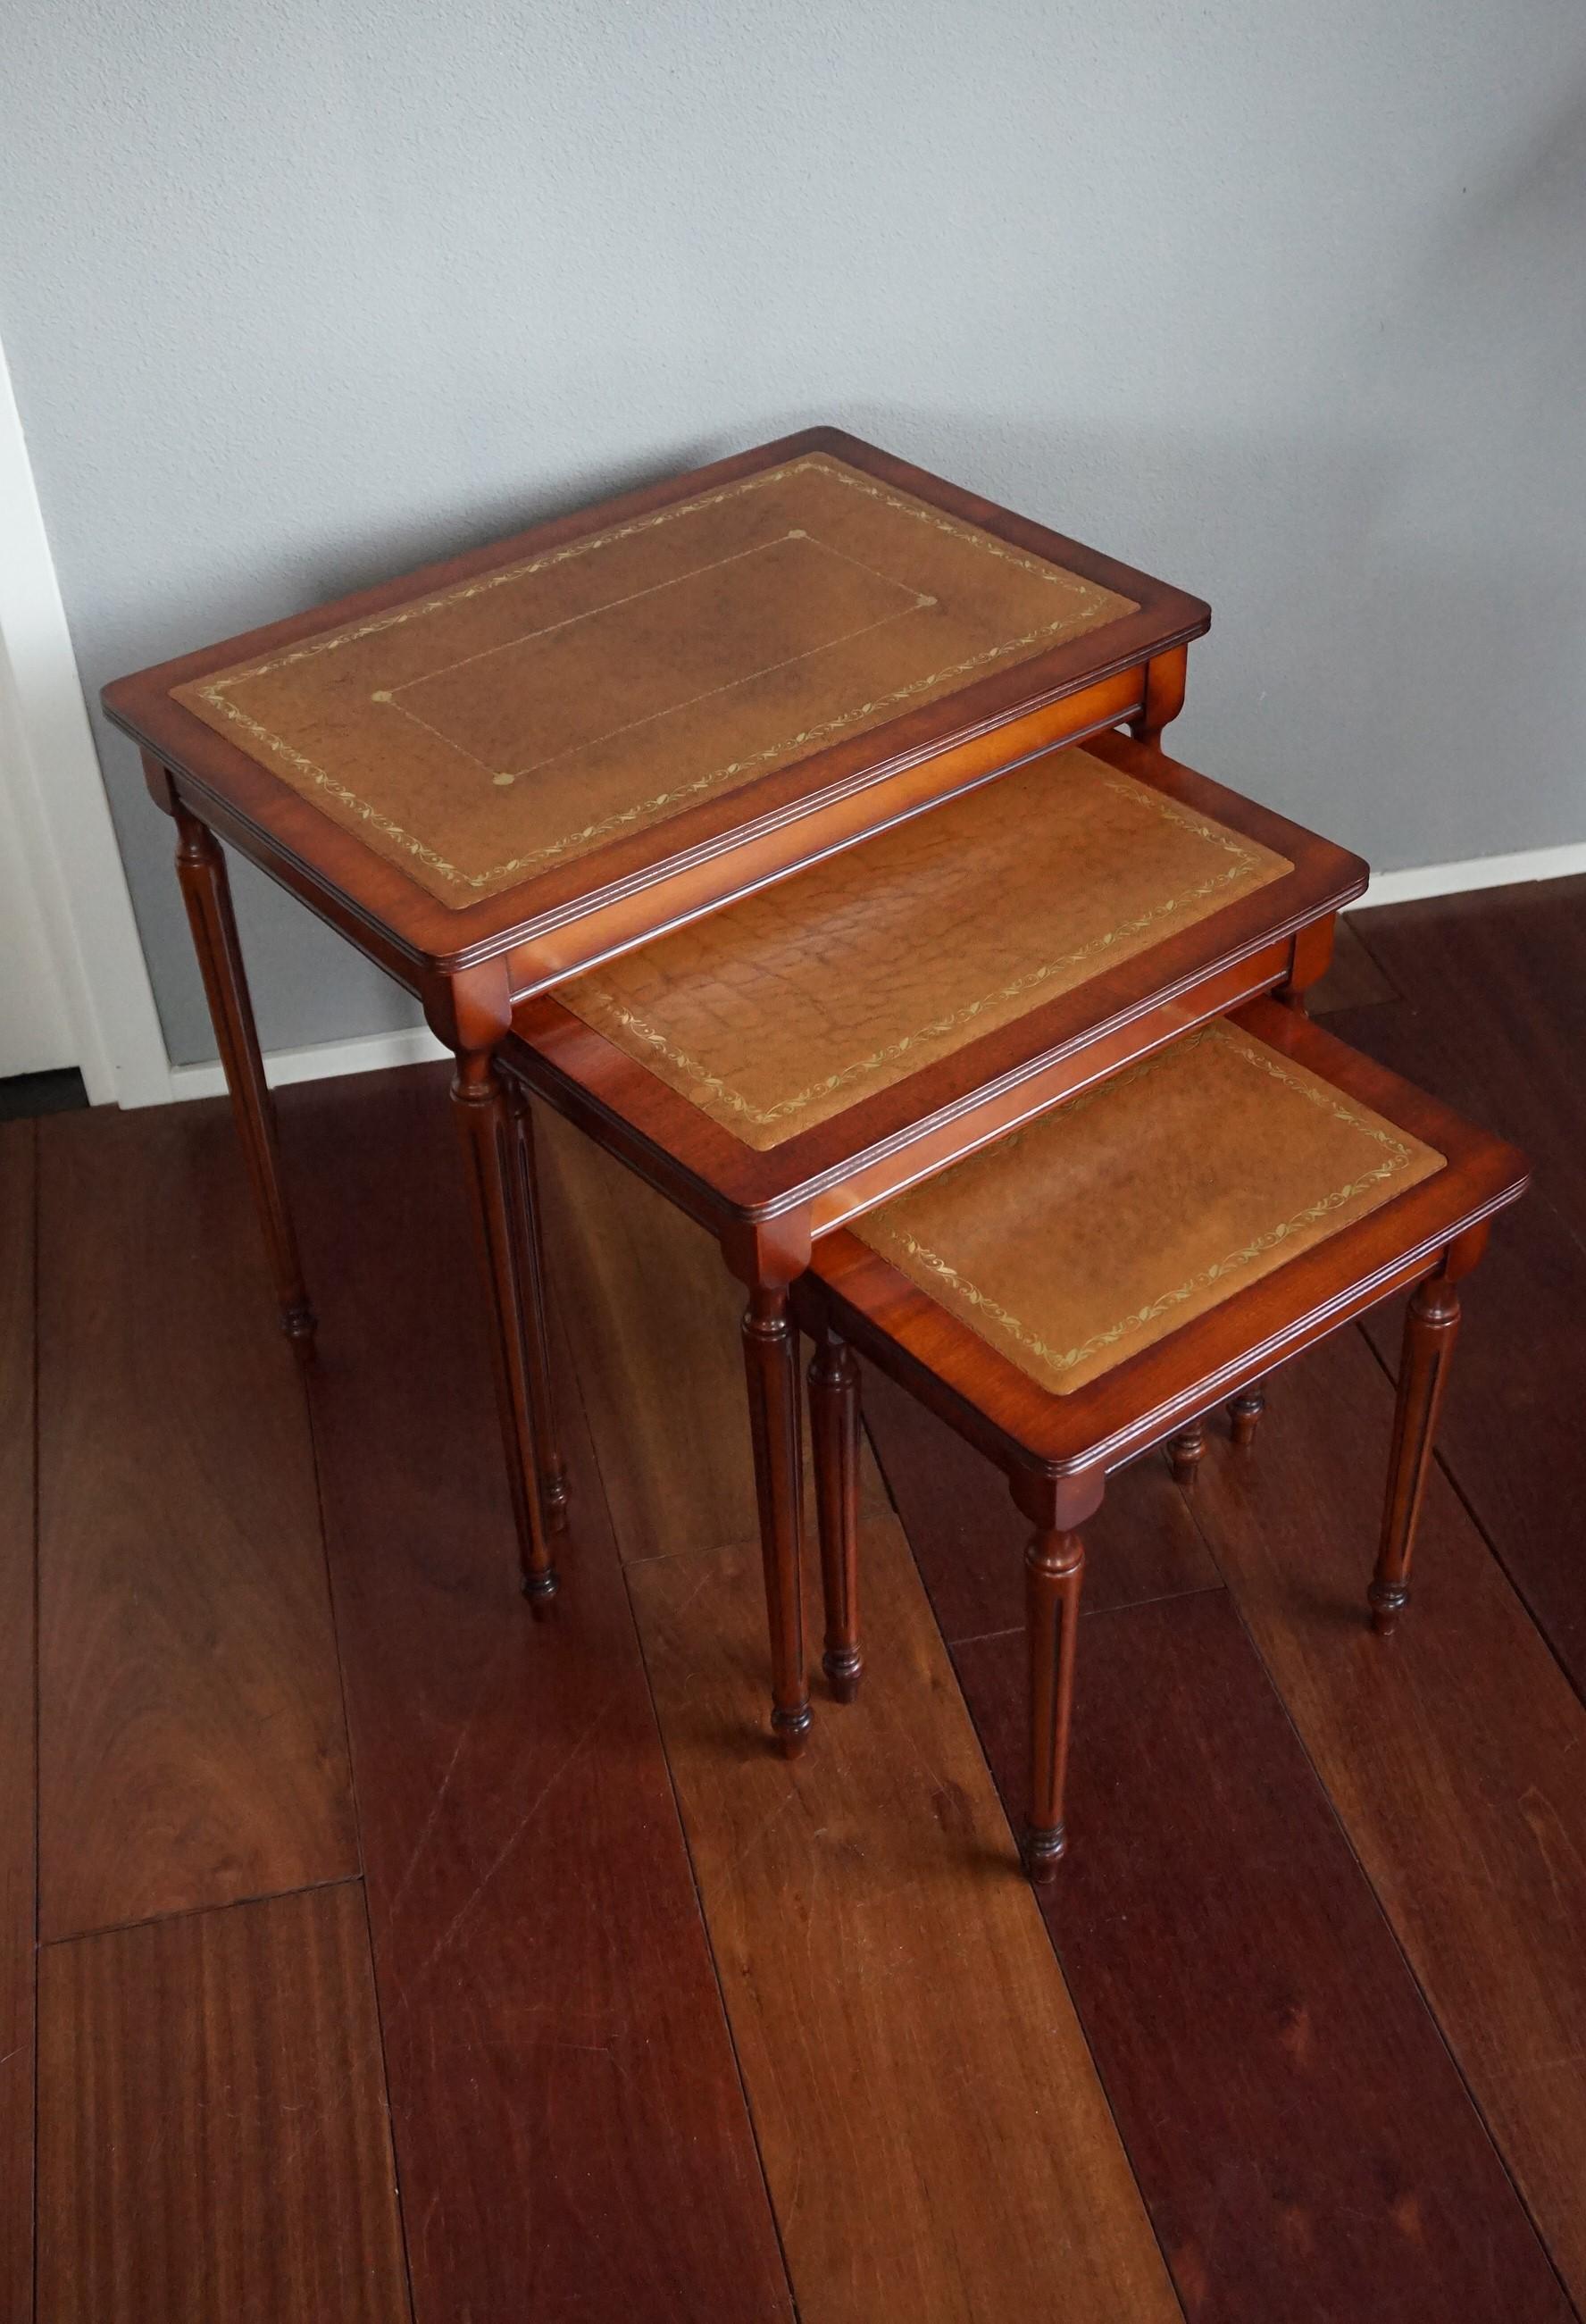 20th Century Antique Look Mahogany Louis Seize Style Nest of Three Tables with Leather Inlay